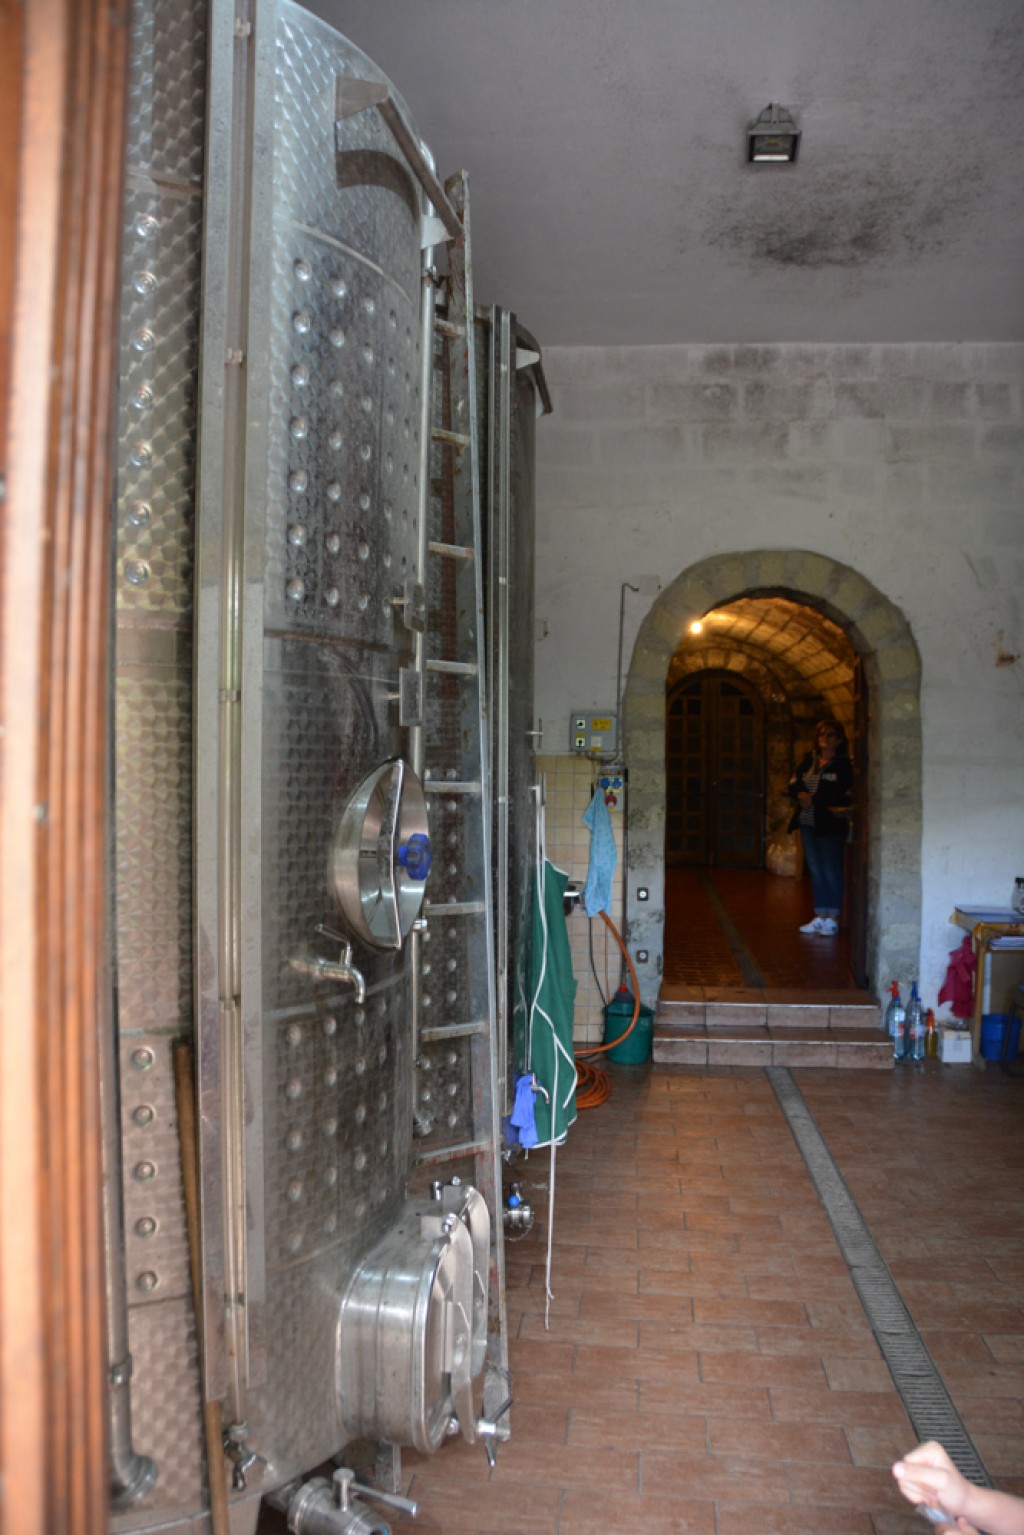 Inside one of the more refined wineries